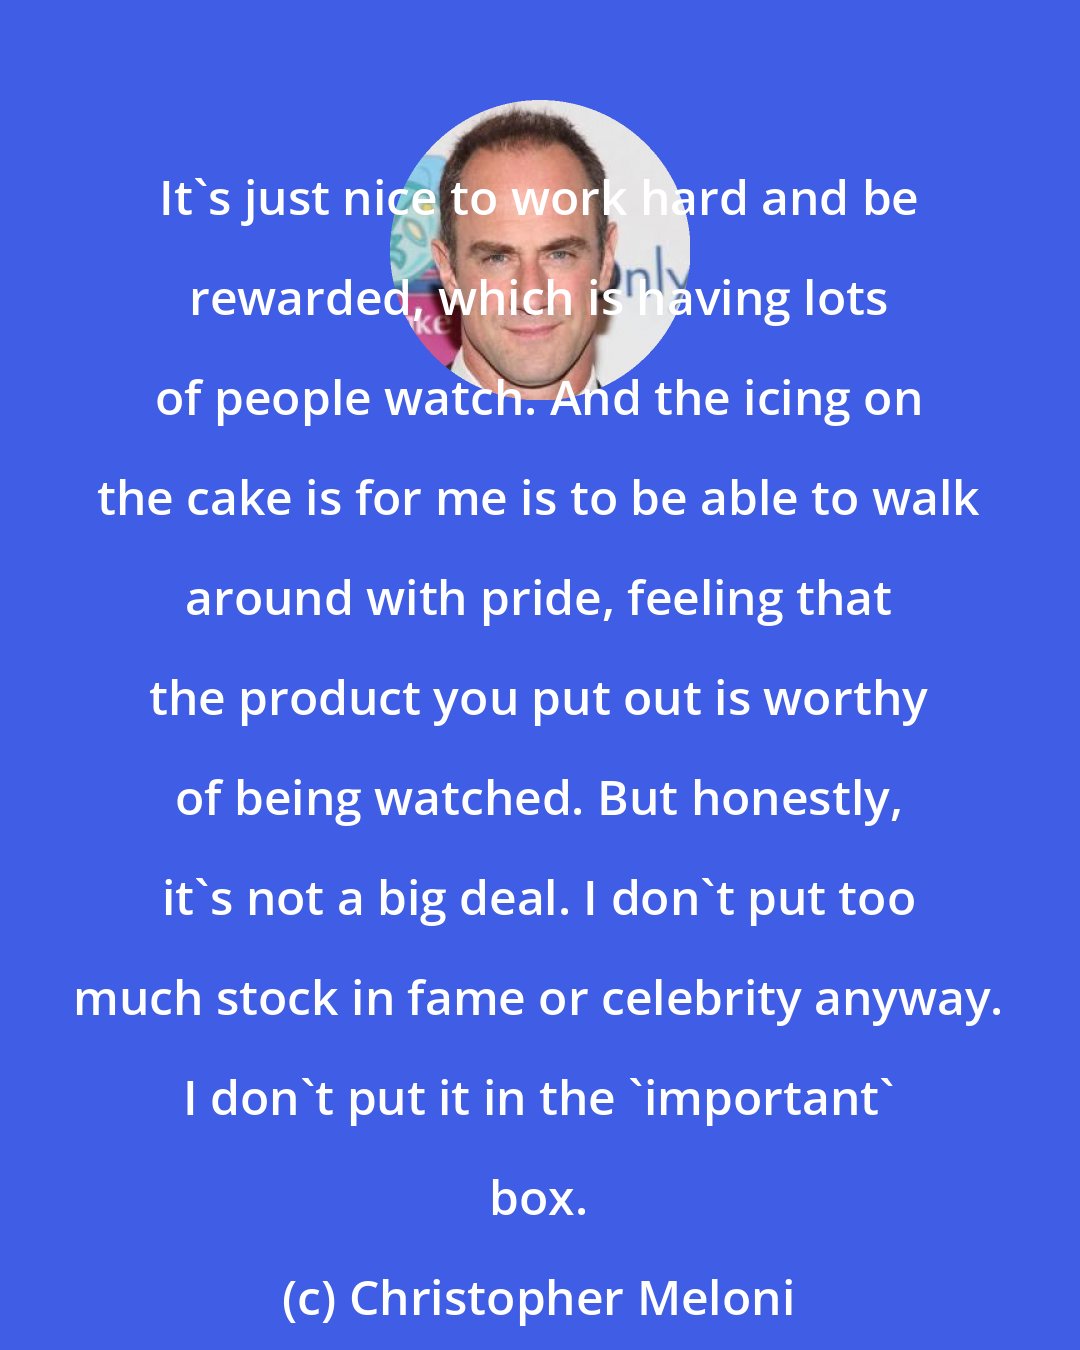 Christopher Meloni: It's just nice to work hard and be rewarded, which is having lots of people watch. And the icing on the cake is for me is to be able to walk around with pride, feeling that the product you put out is worthy of being watched. But honestly, it's not a big deal. I don't put too much stock in fame or celebrity anyway. I don't put it in the 'important' box.